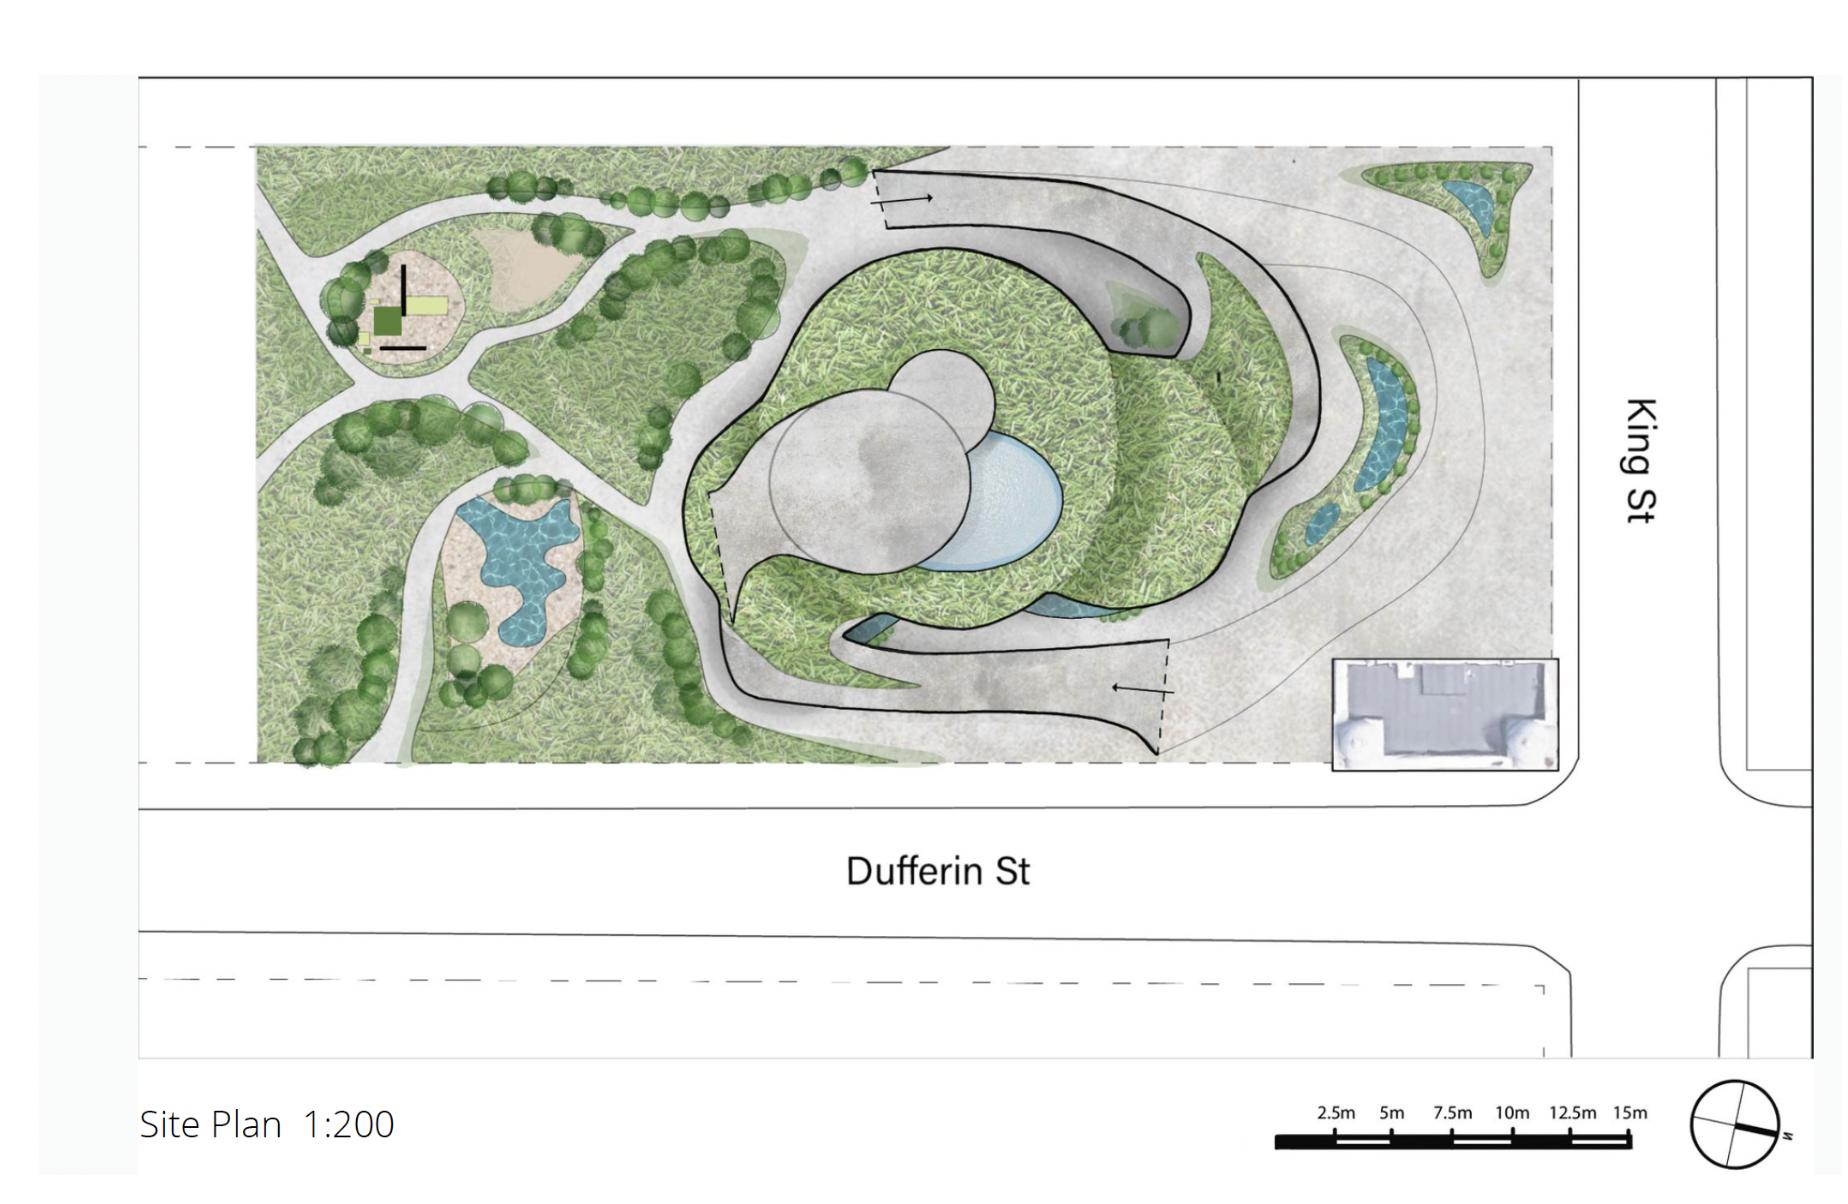 King and Dufferin Community Center Site Plan